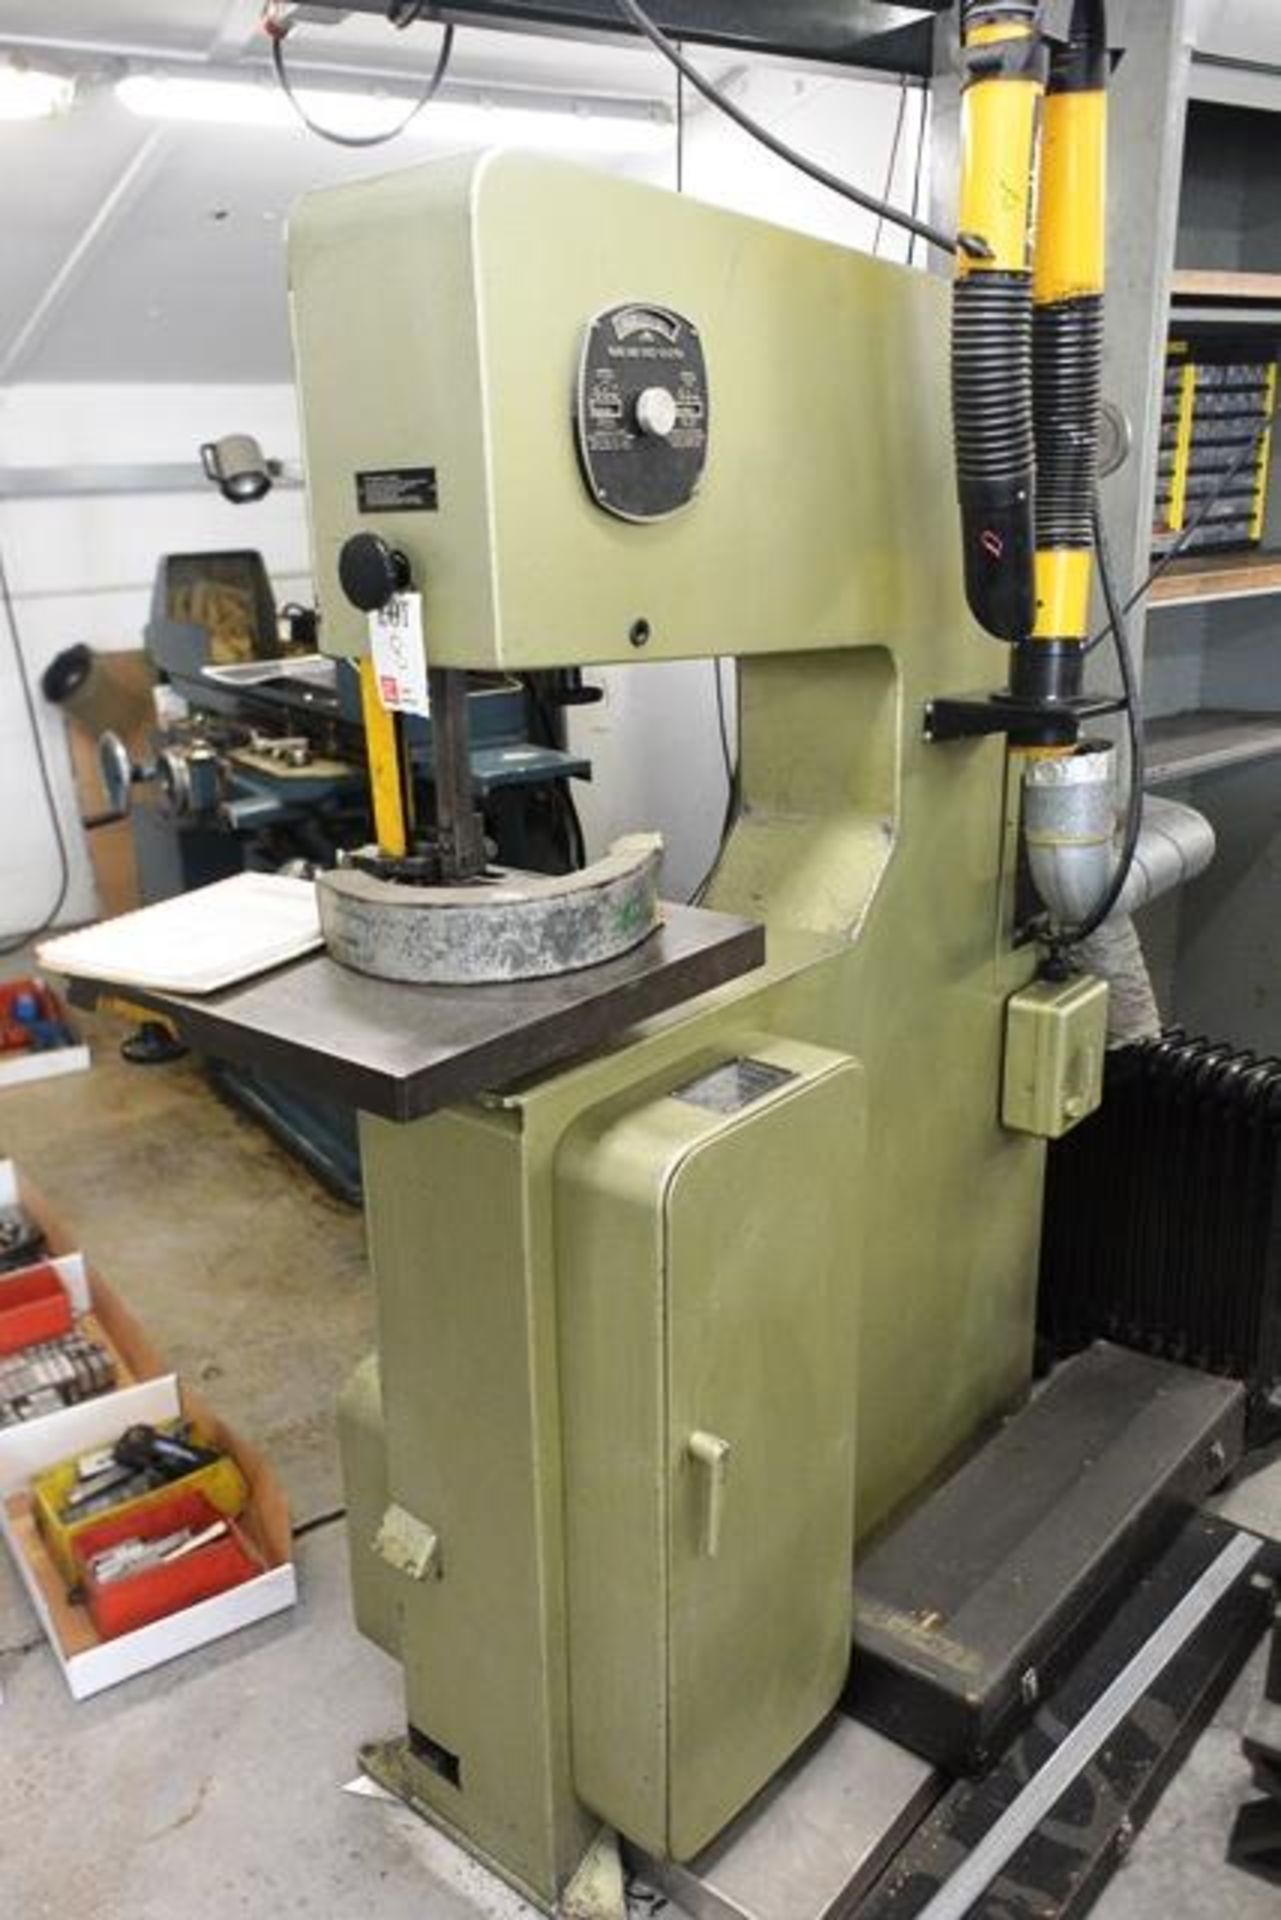 Startrite 24 - V - 10 vertical bandsaw, serial no. 55454 table size 480 x 480mm (3 phase -